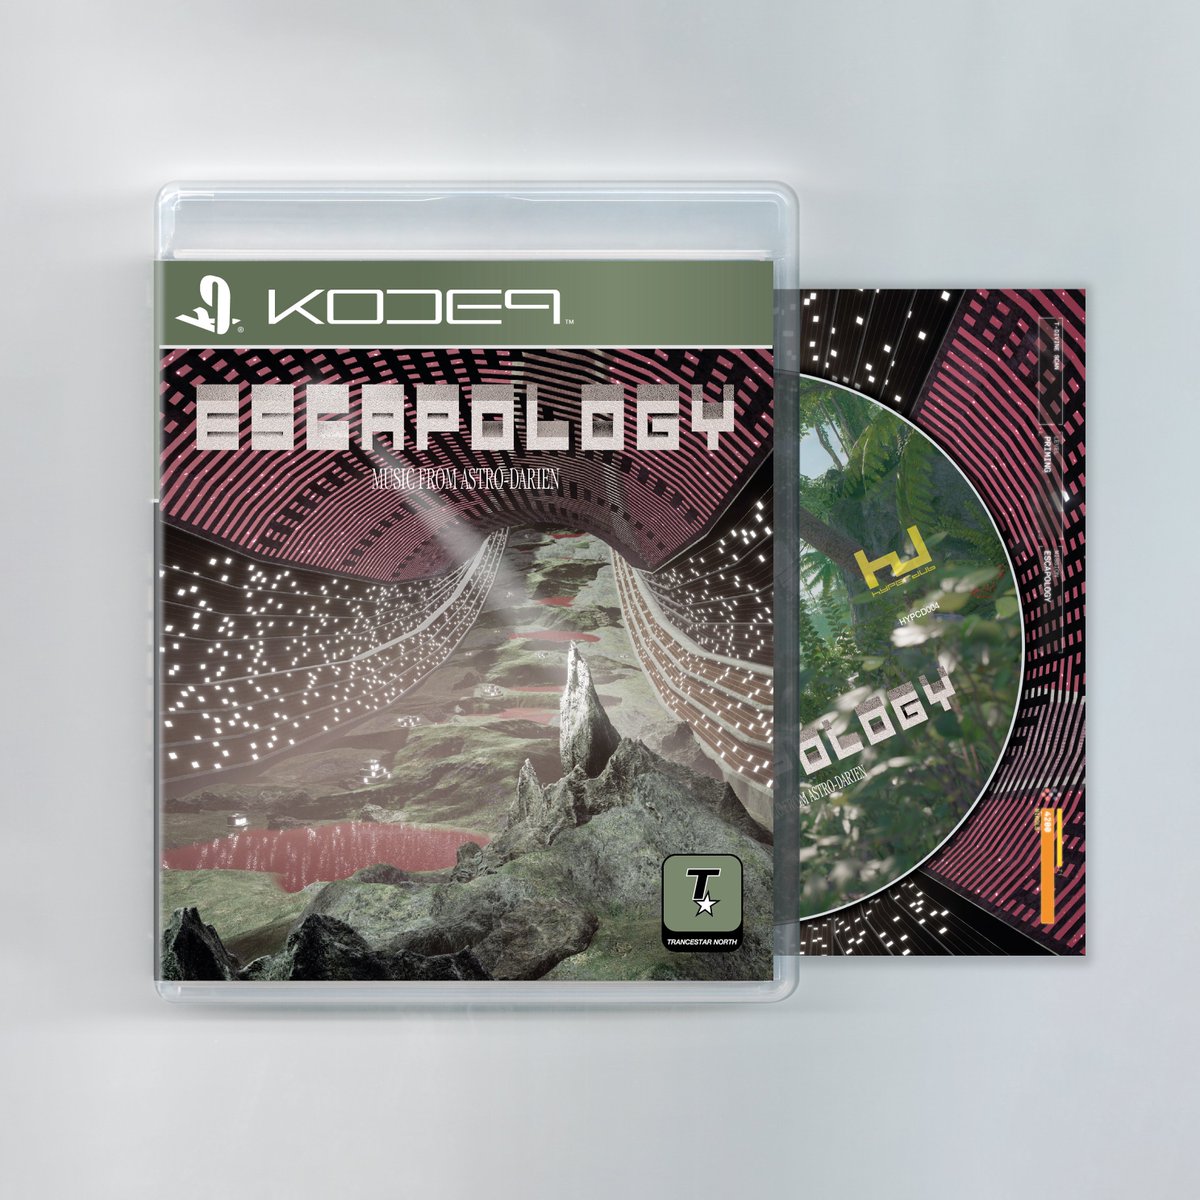 .@kodenine 's Escapology CD turned up and looking 🔥 kode9.bandcamp.com/album/escapolo…